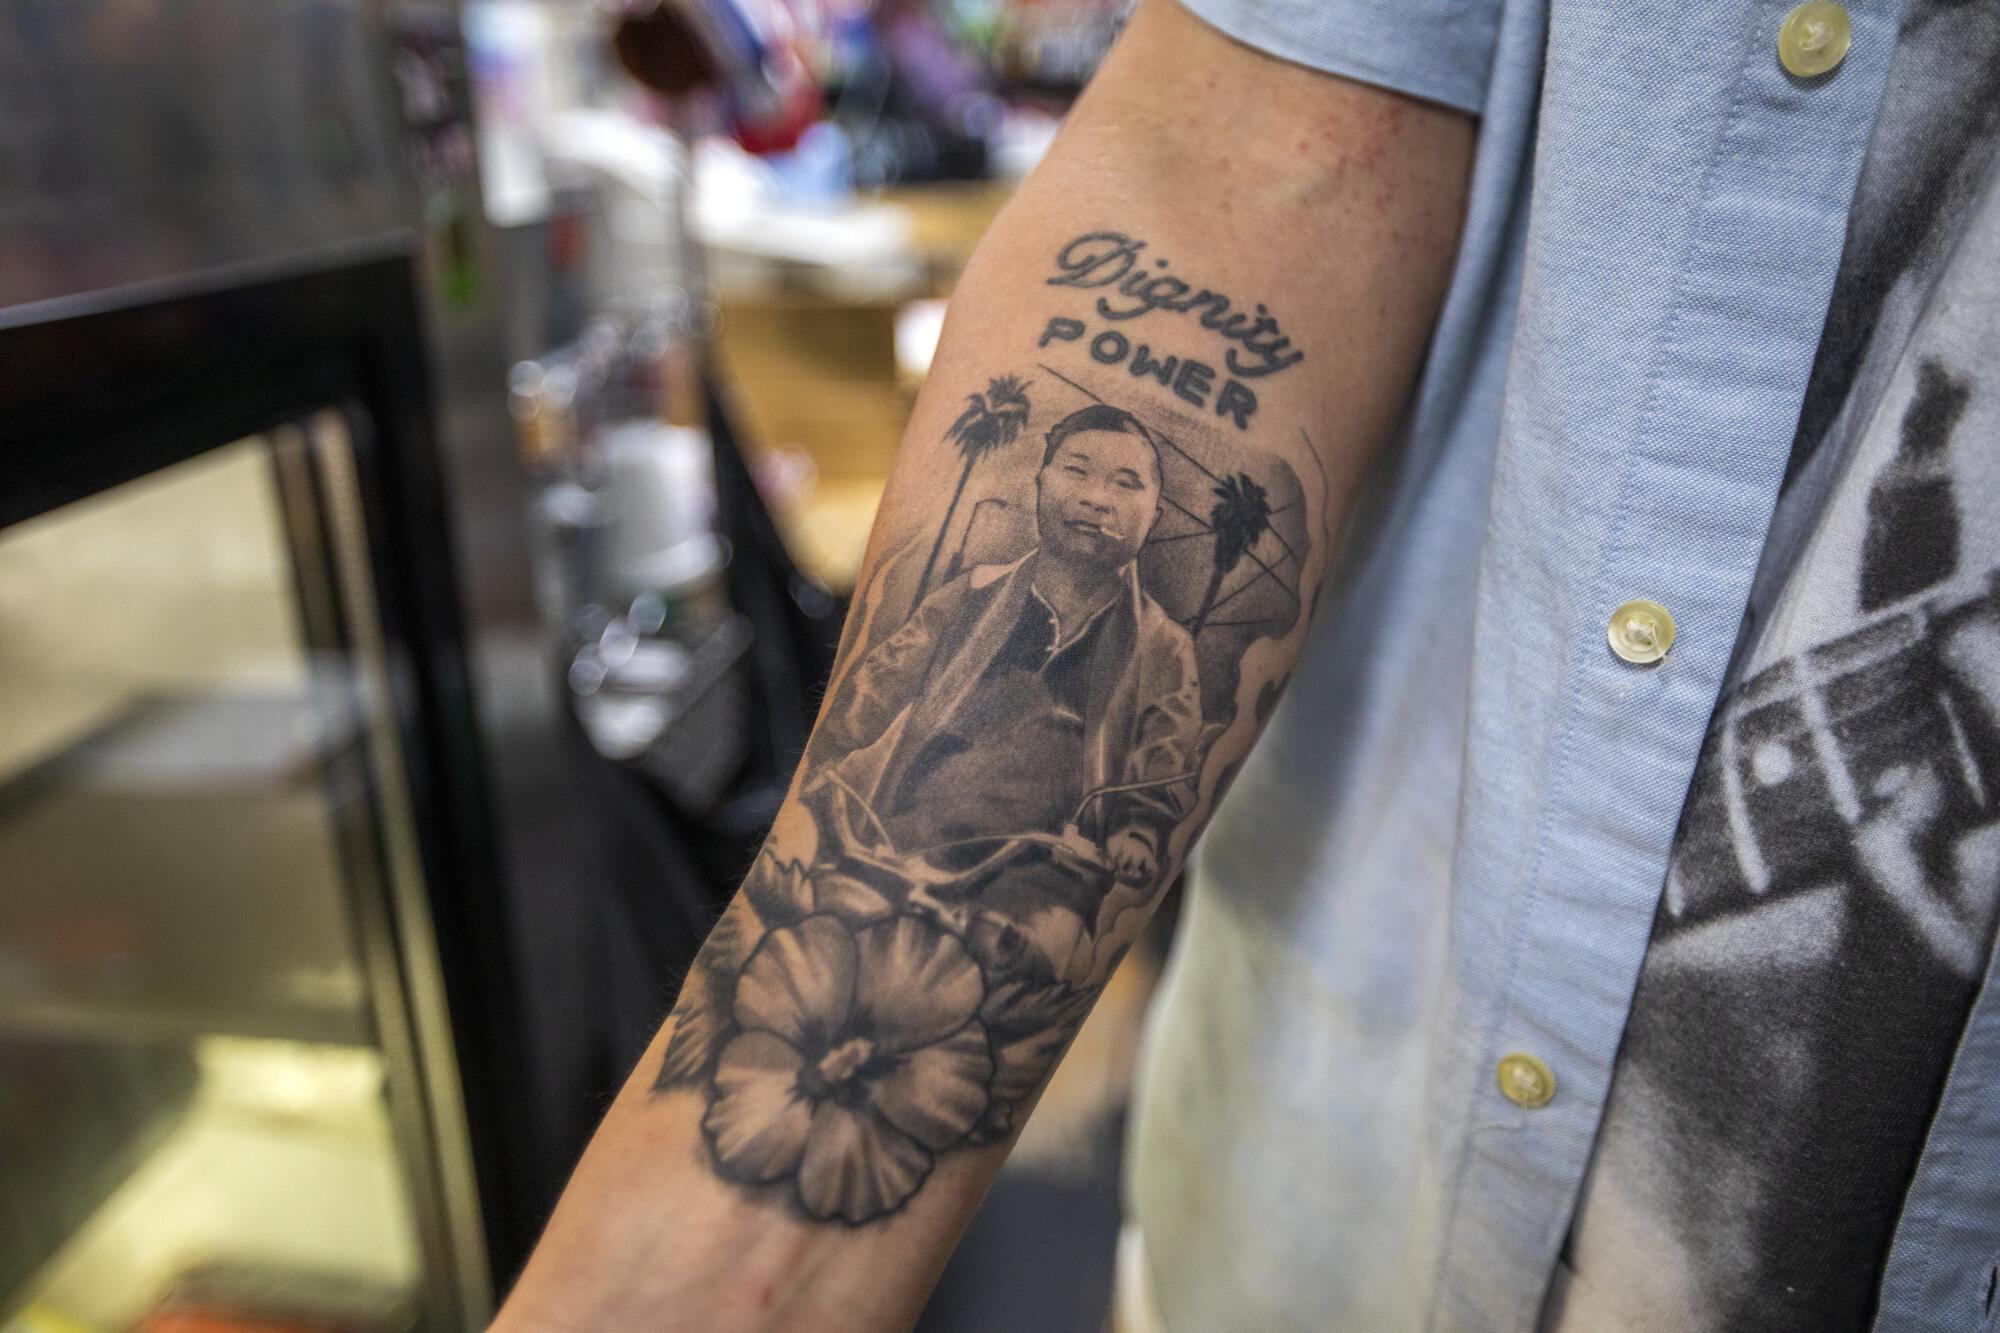 Danny Park, 38, has a tattoo of his grandfather on his right forearm. 